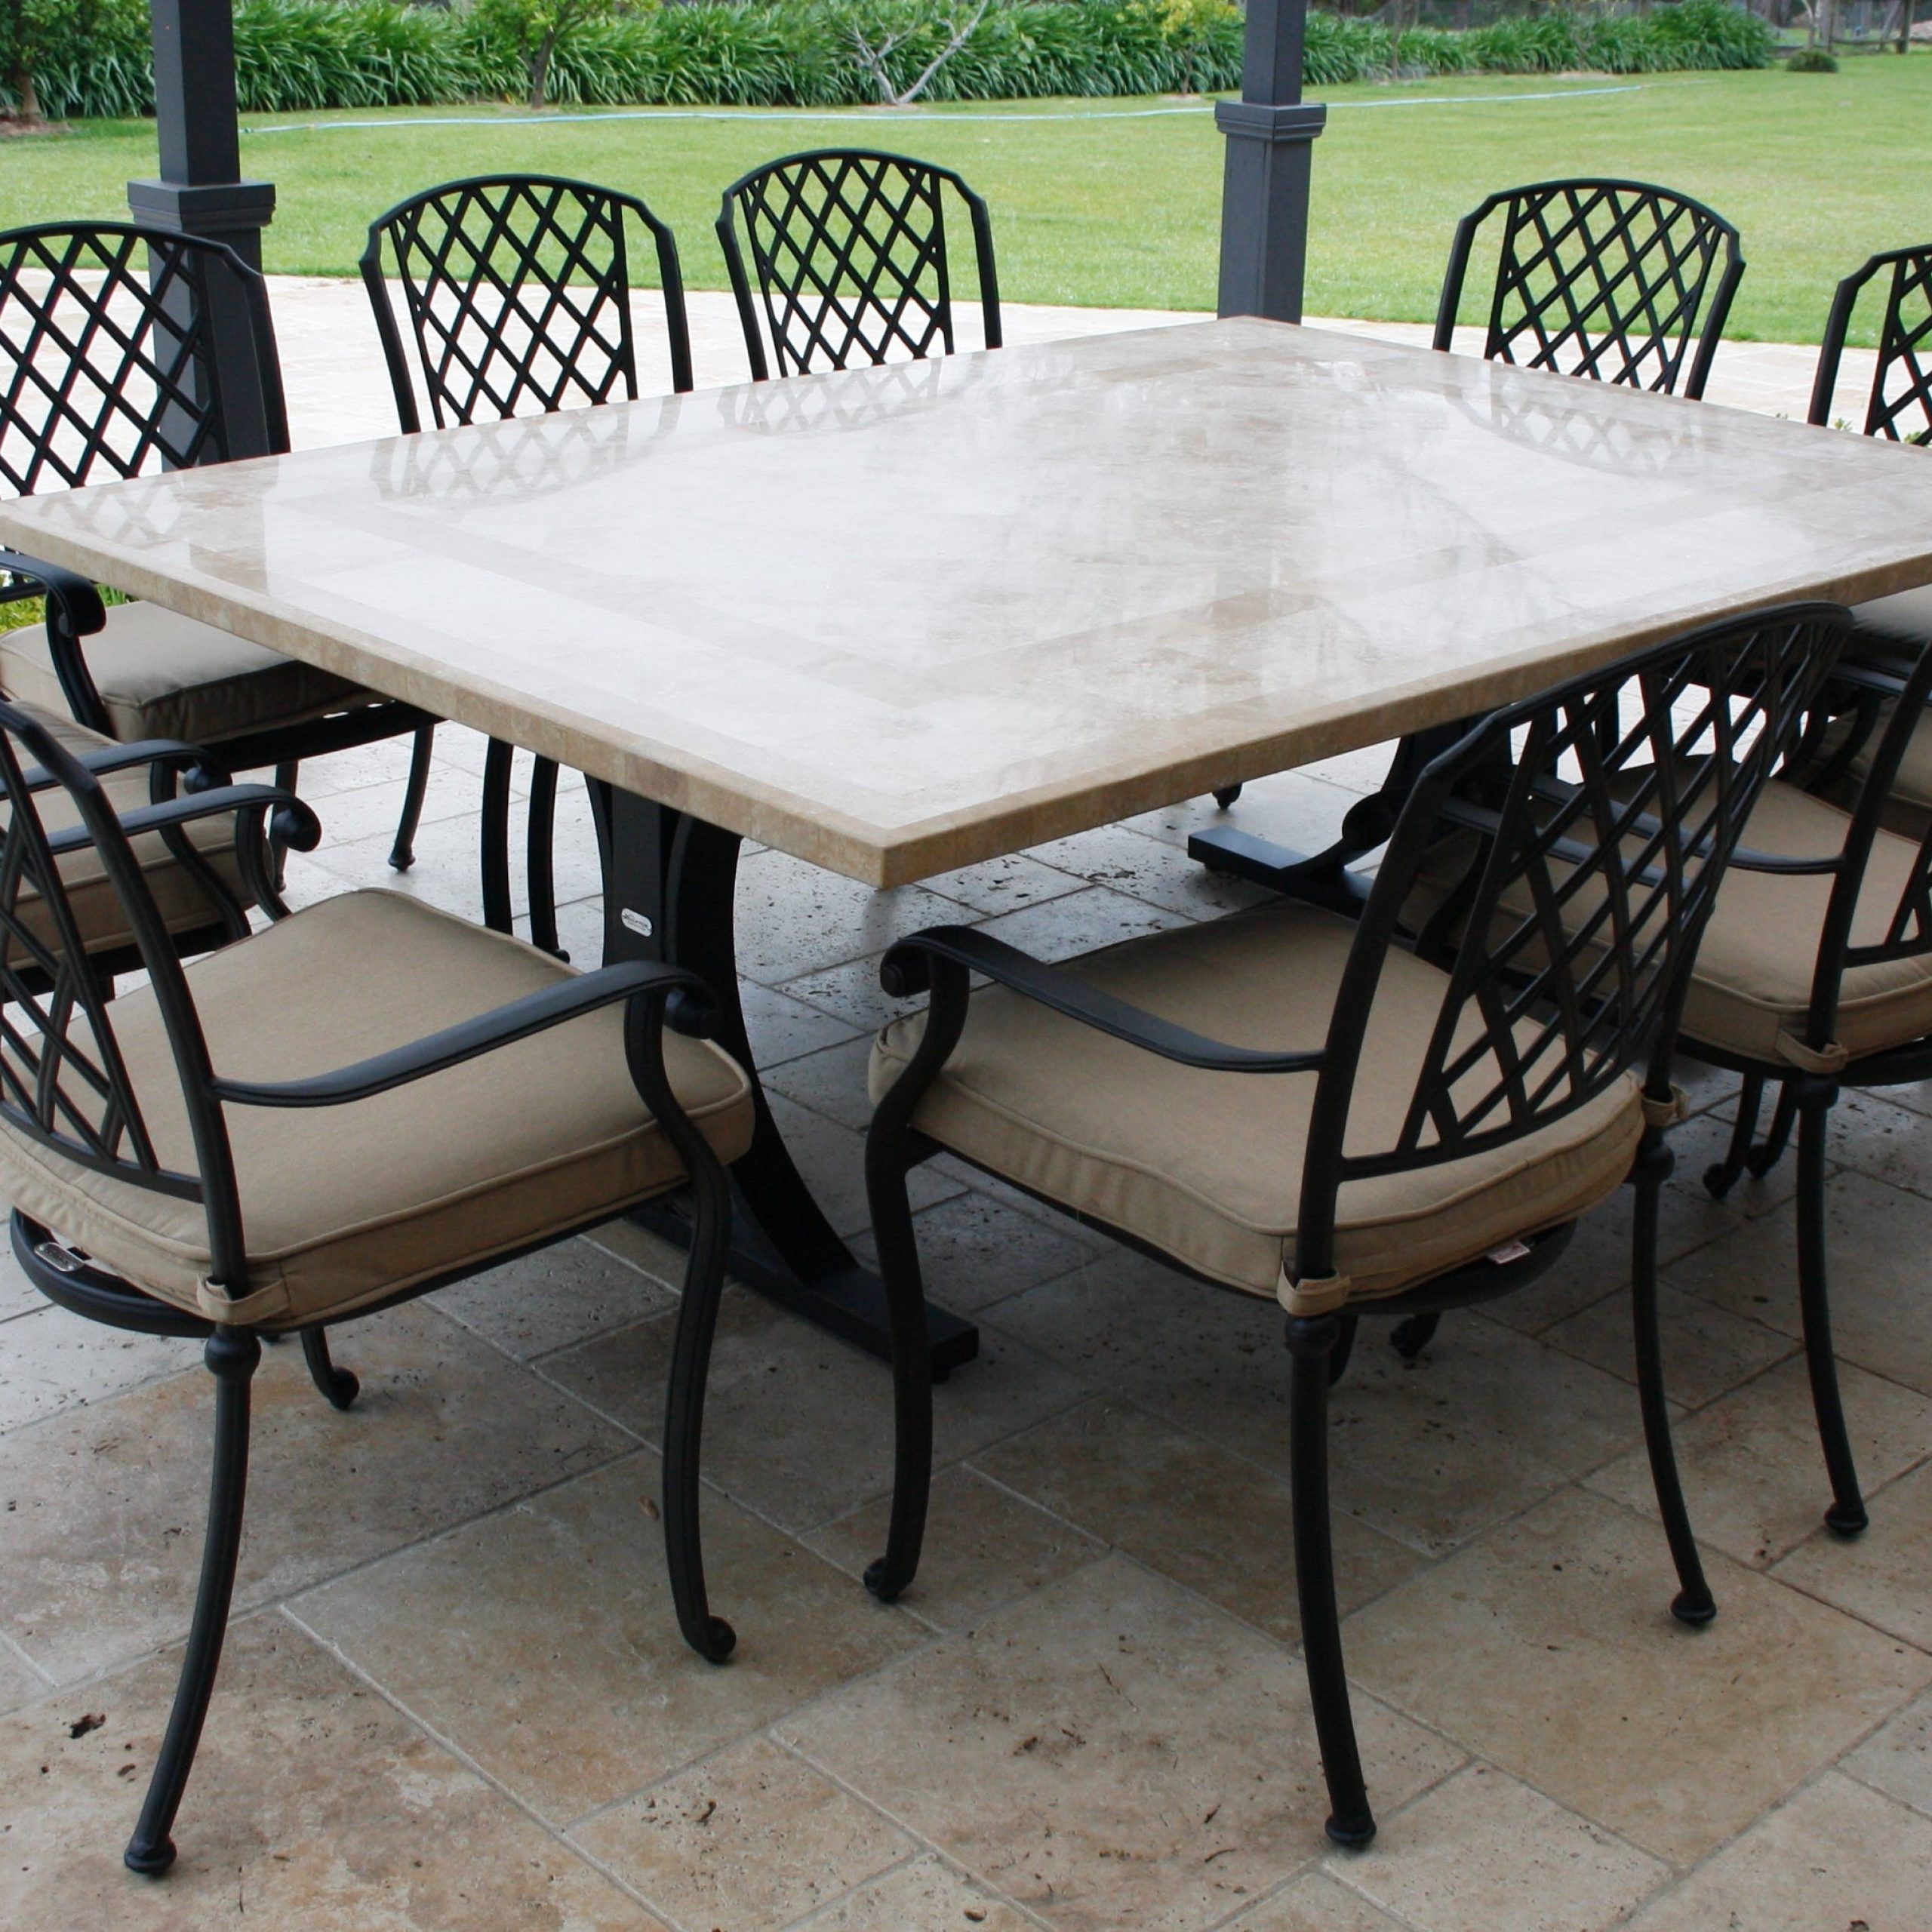 Natural Stone Outdoor Tables Throughout Most Recent Stone Top Outdoor Tables (View 5 of 15)